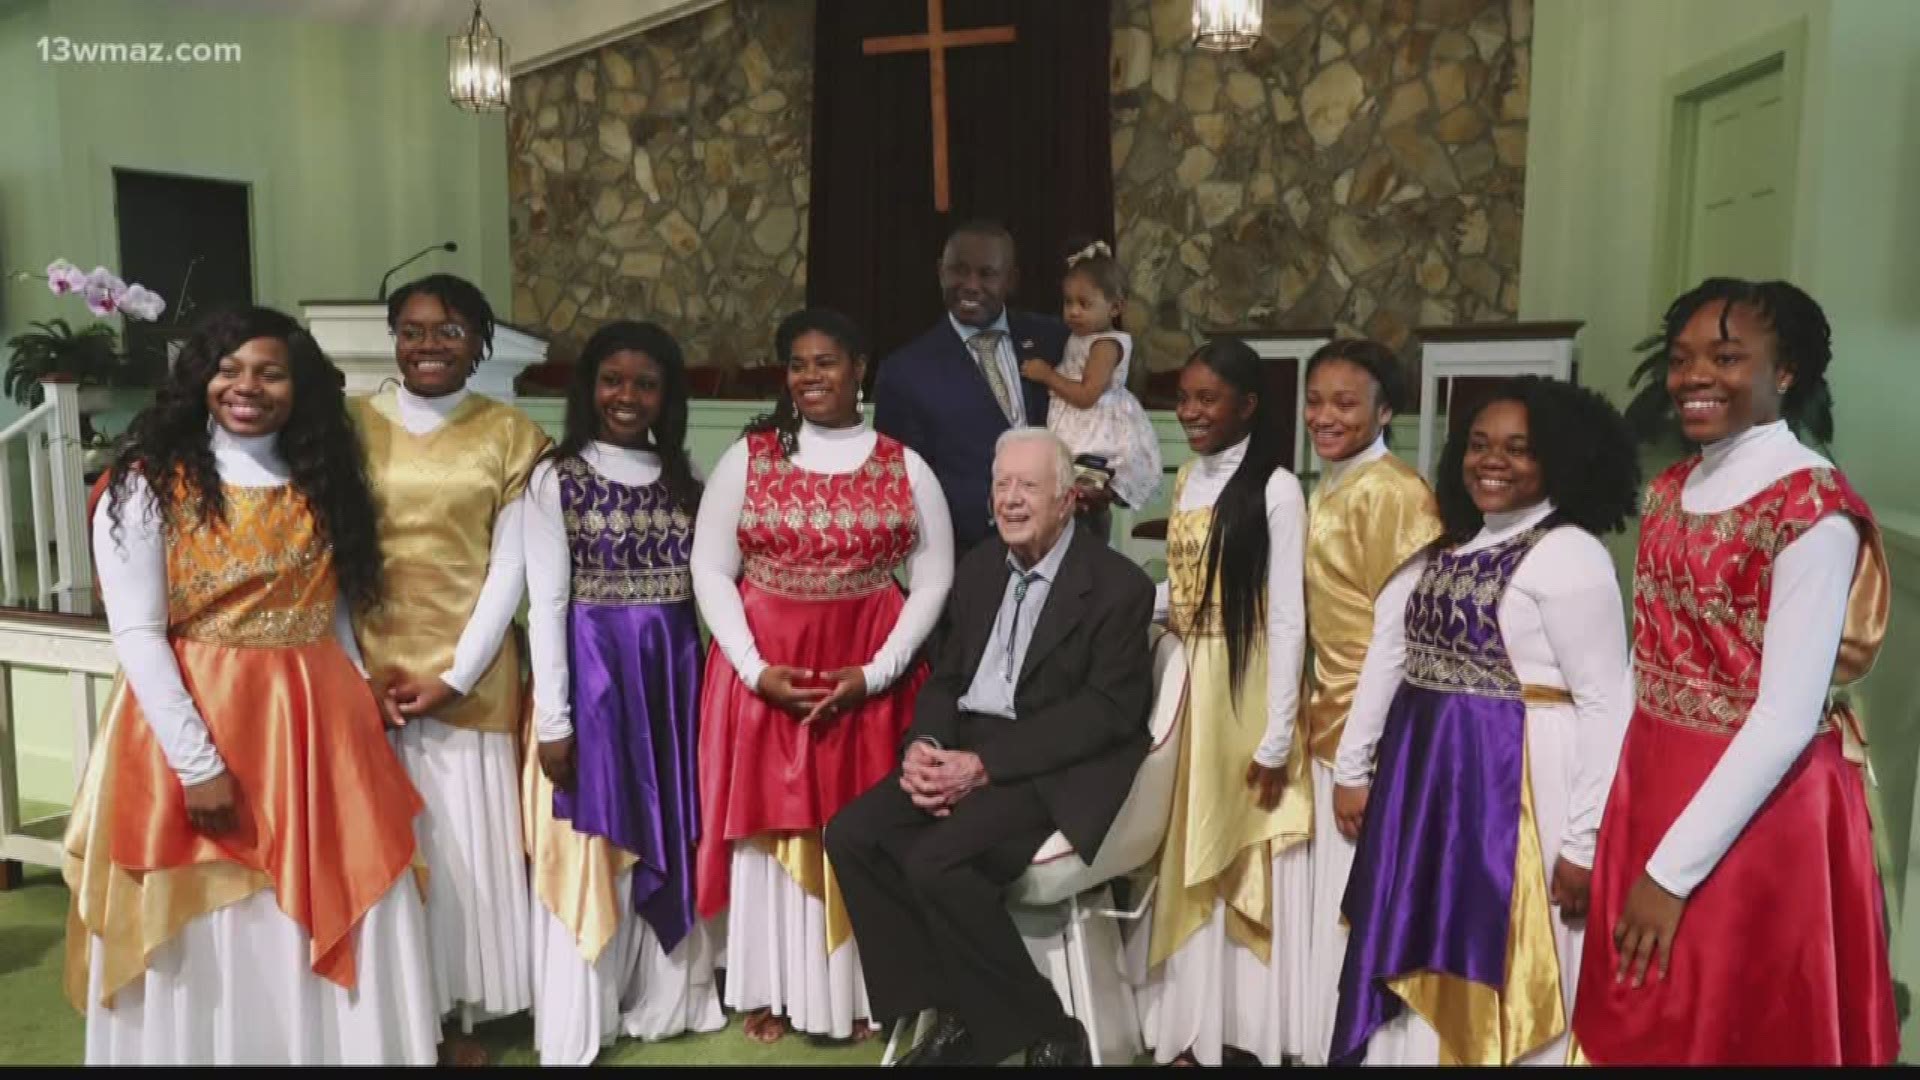 A Macon dance group receiving national attention for its performance for former president Jimmy Carter.